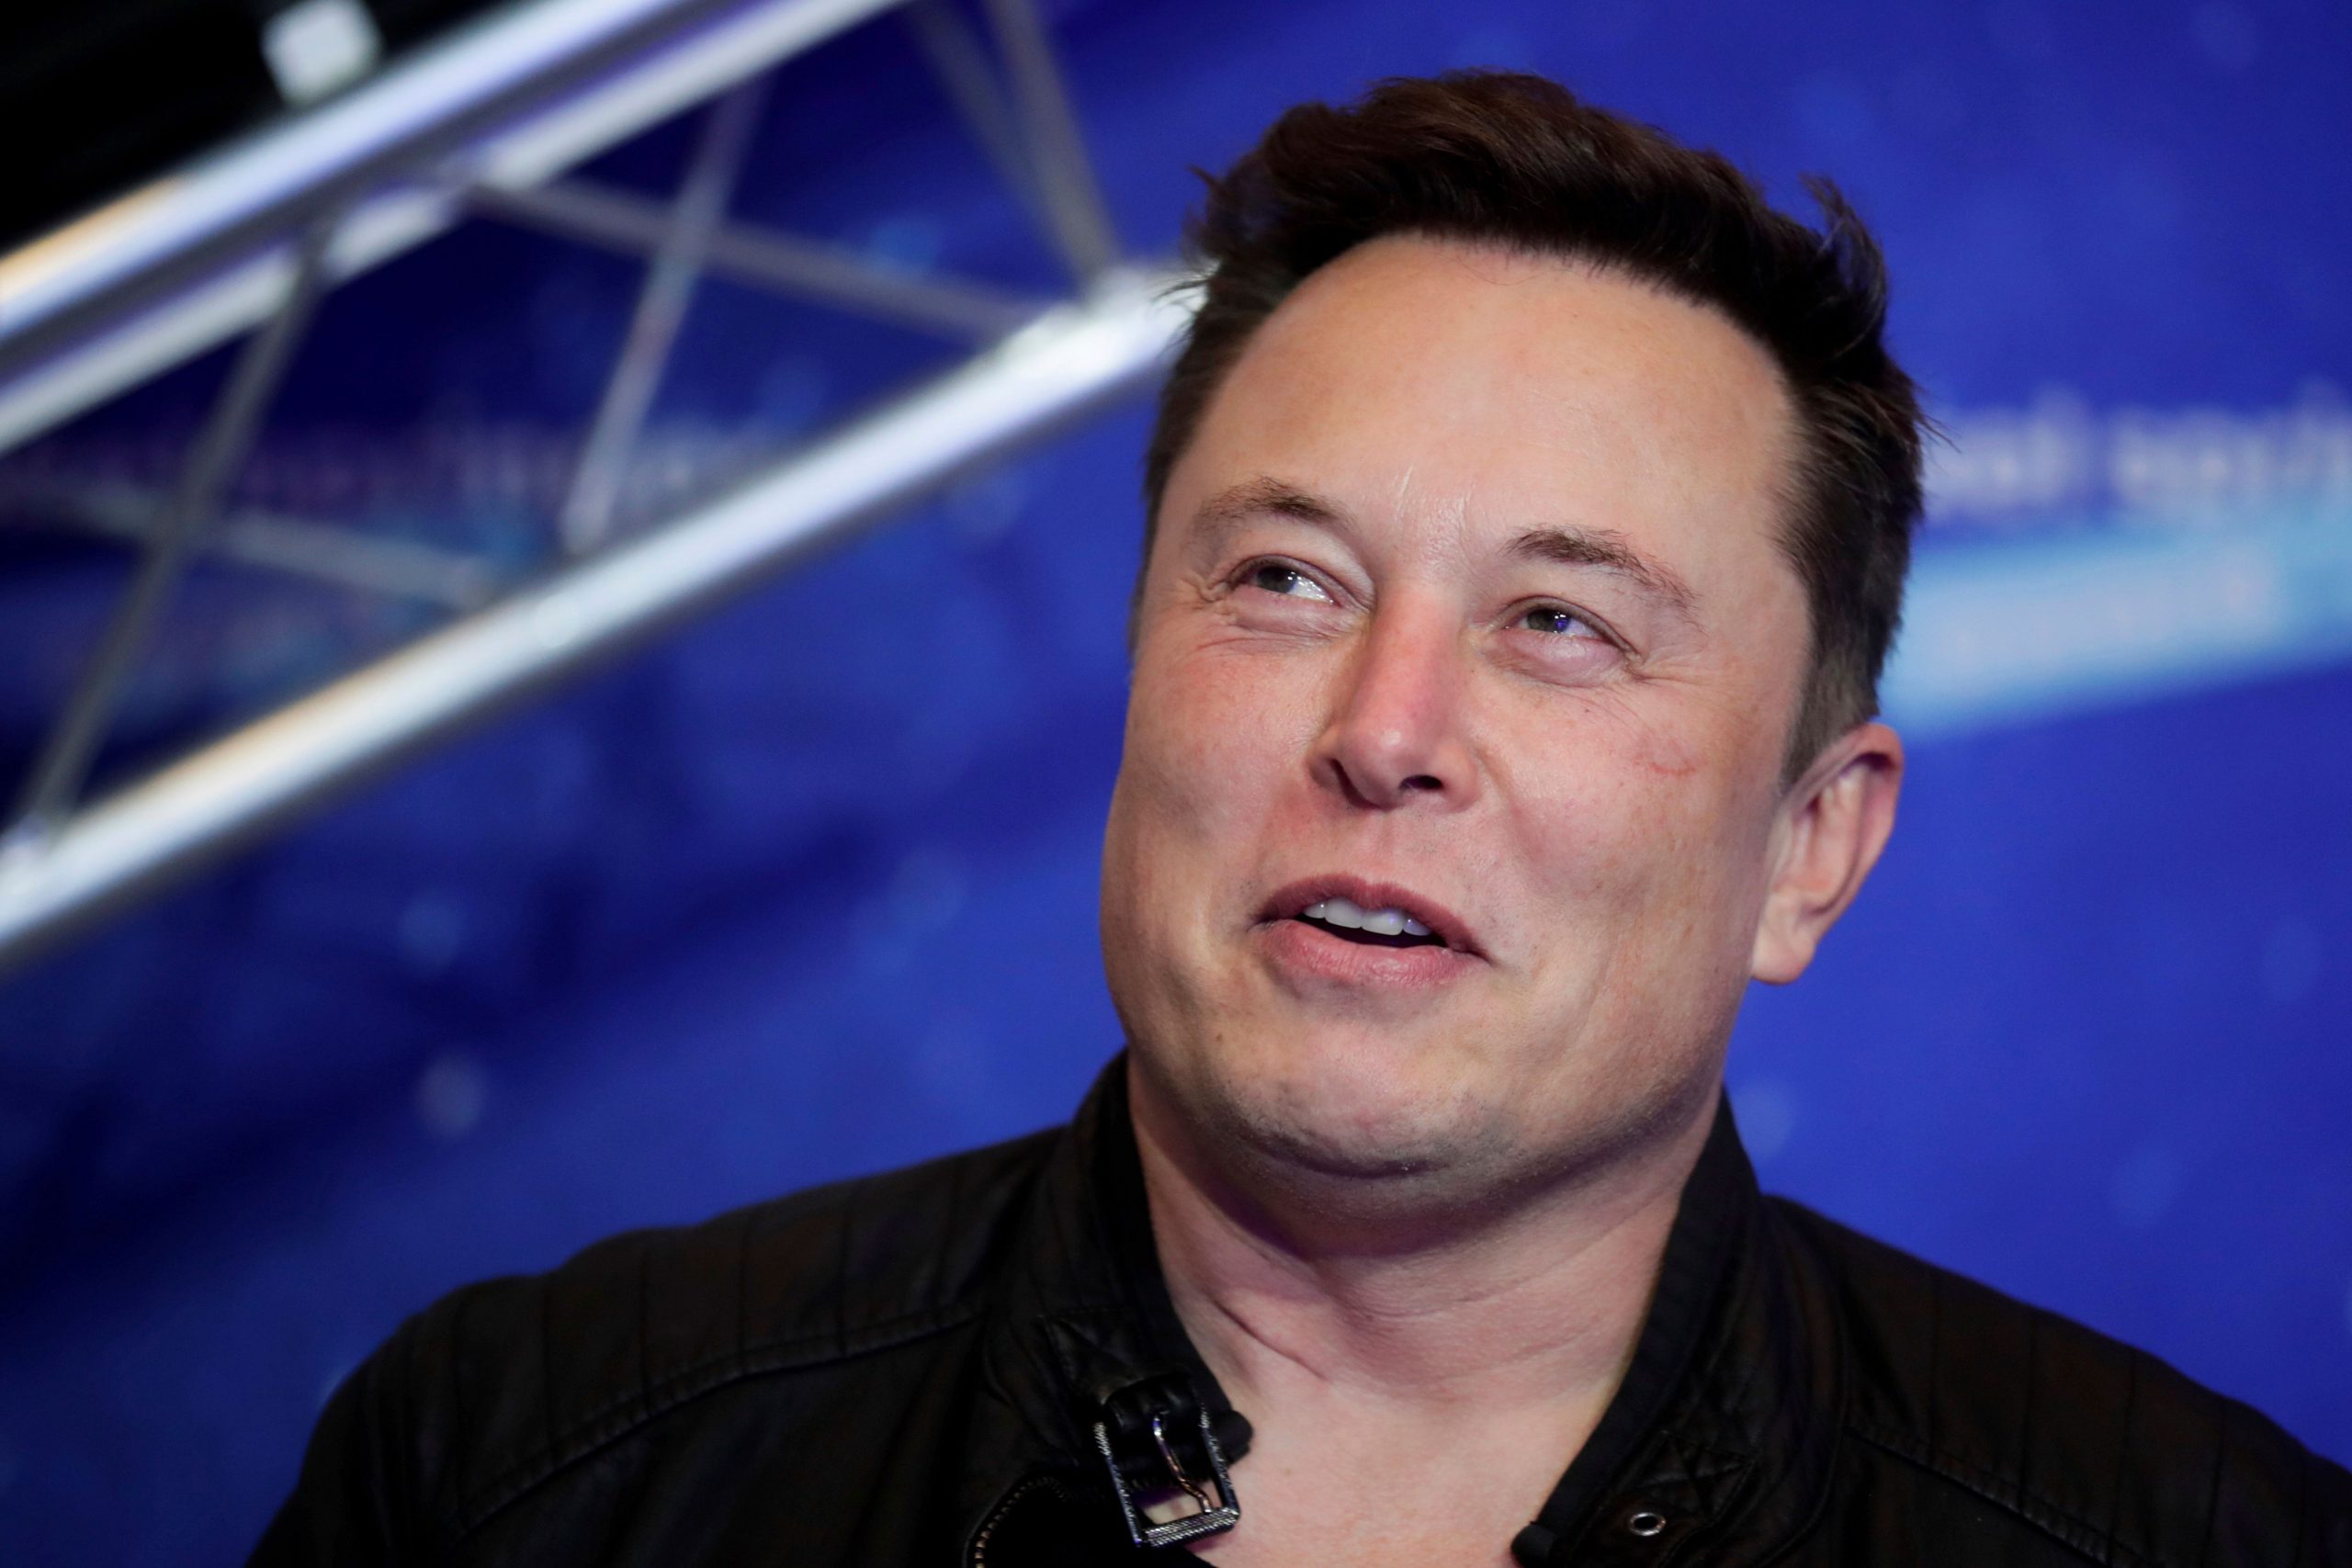 Stop the deal: Advocacy group launch campaign against Musk buying Twitter